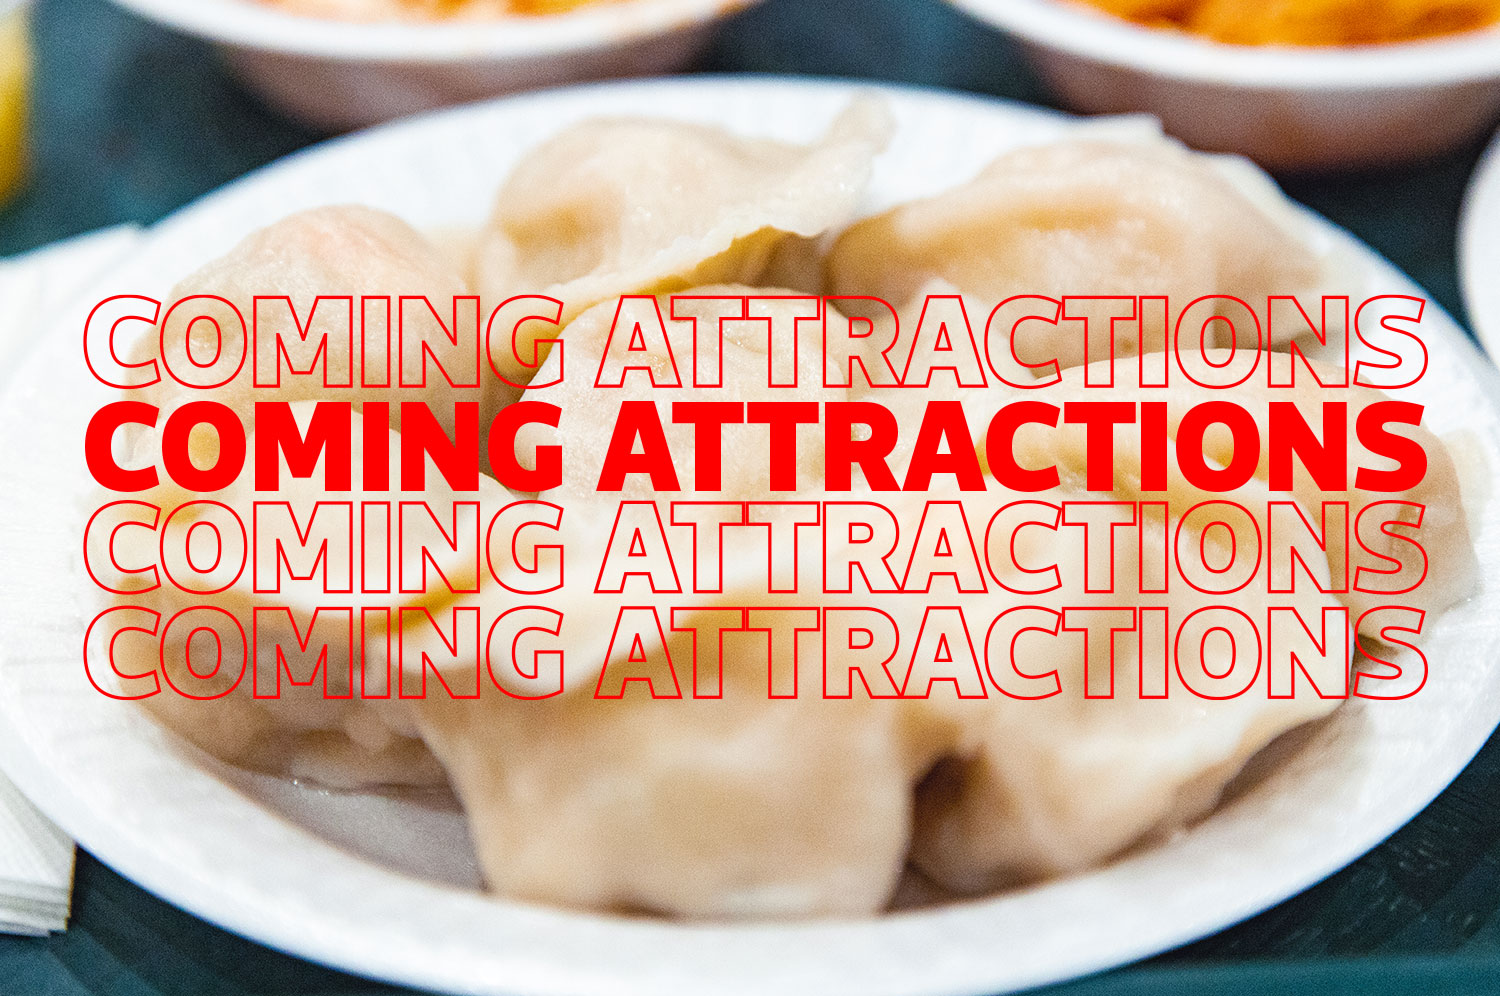 A Coming Attractions sign over dumplings